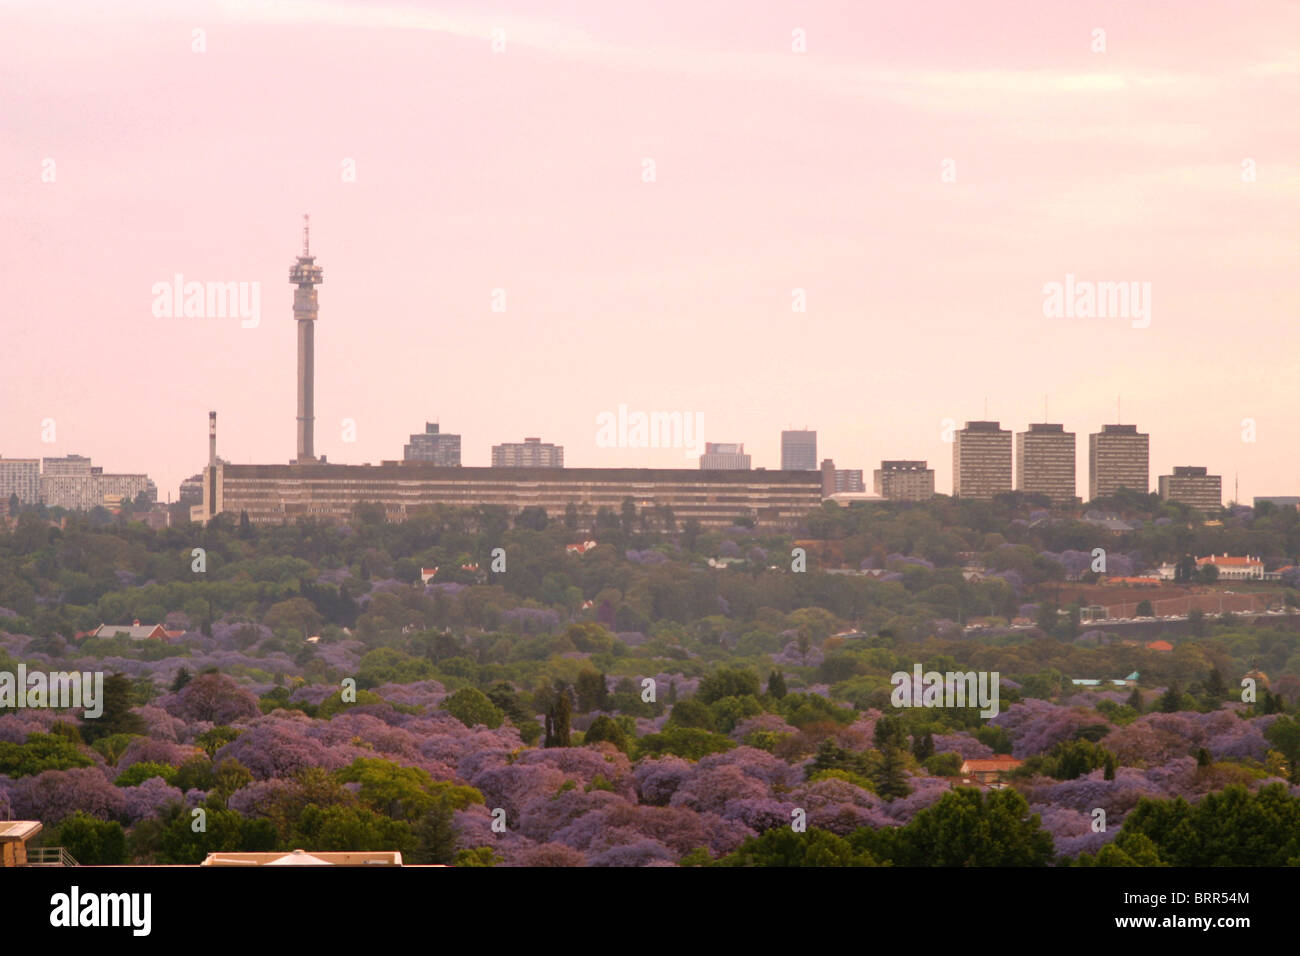 Johannesburg skyline with the Hillbrow Tower and a view over the suburbs with lots of Jacaranda trees Stock Photo